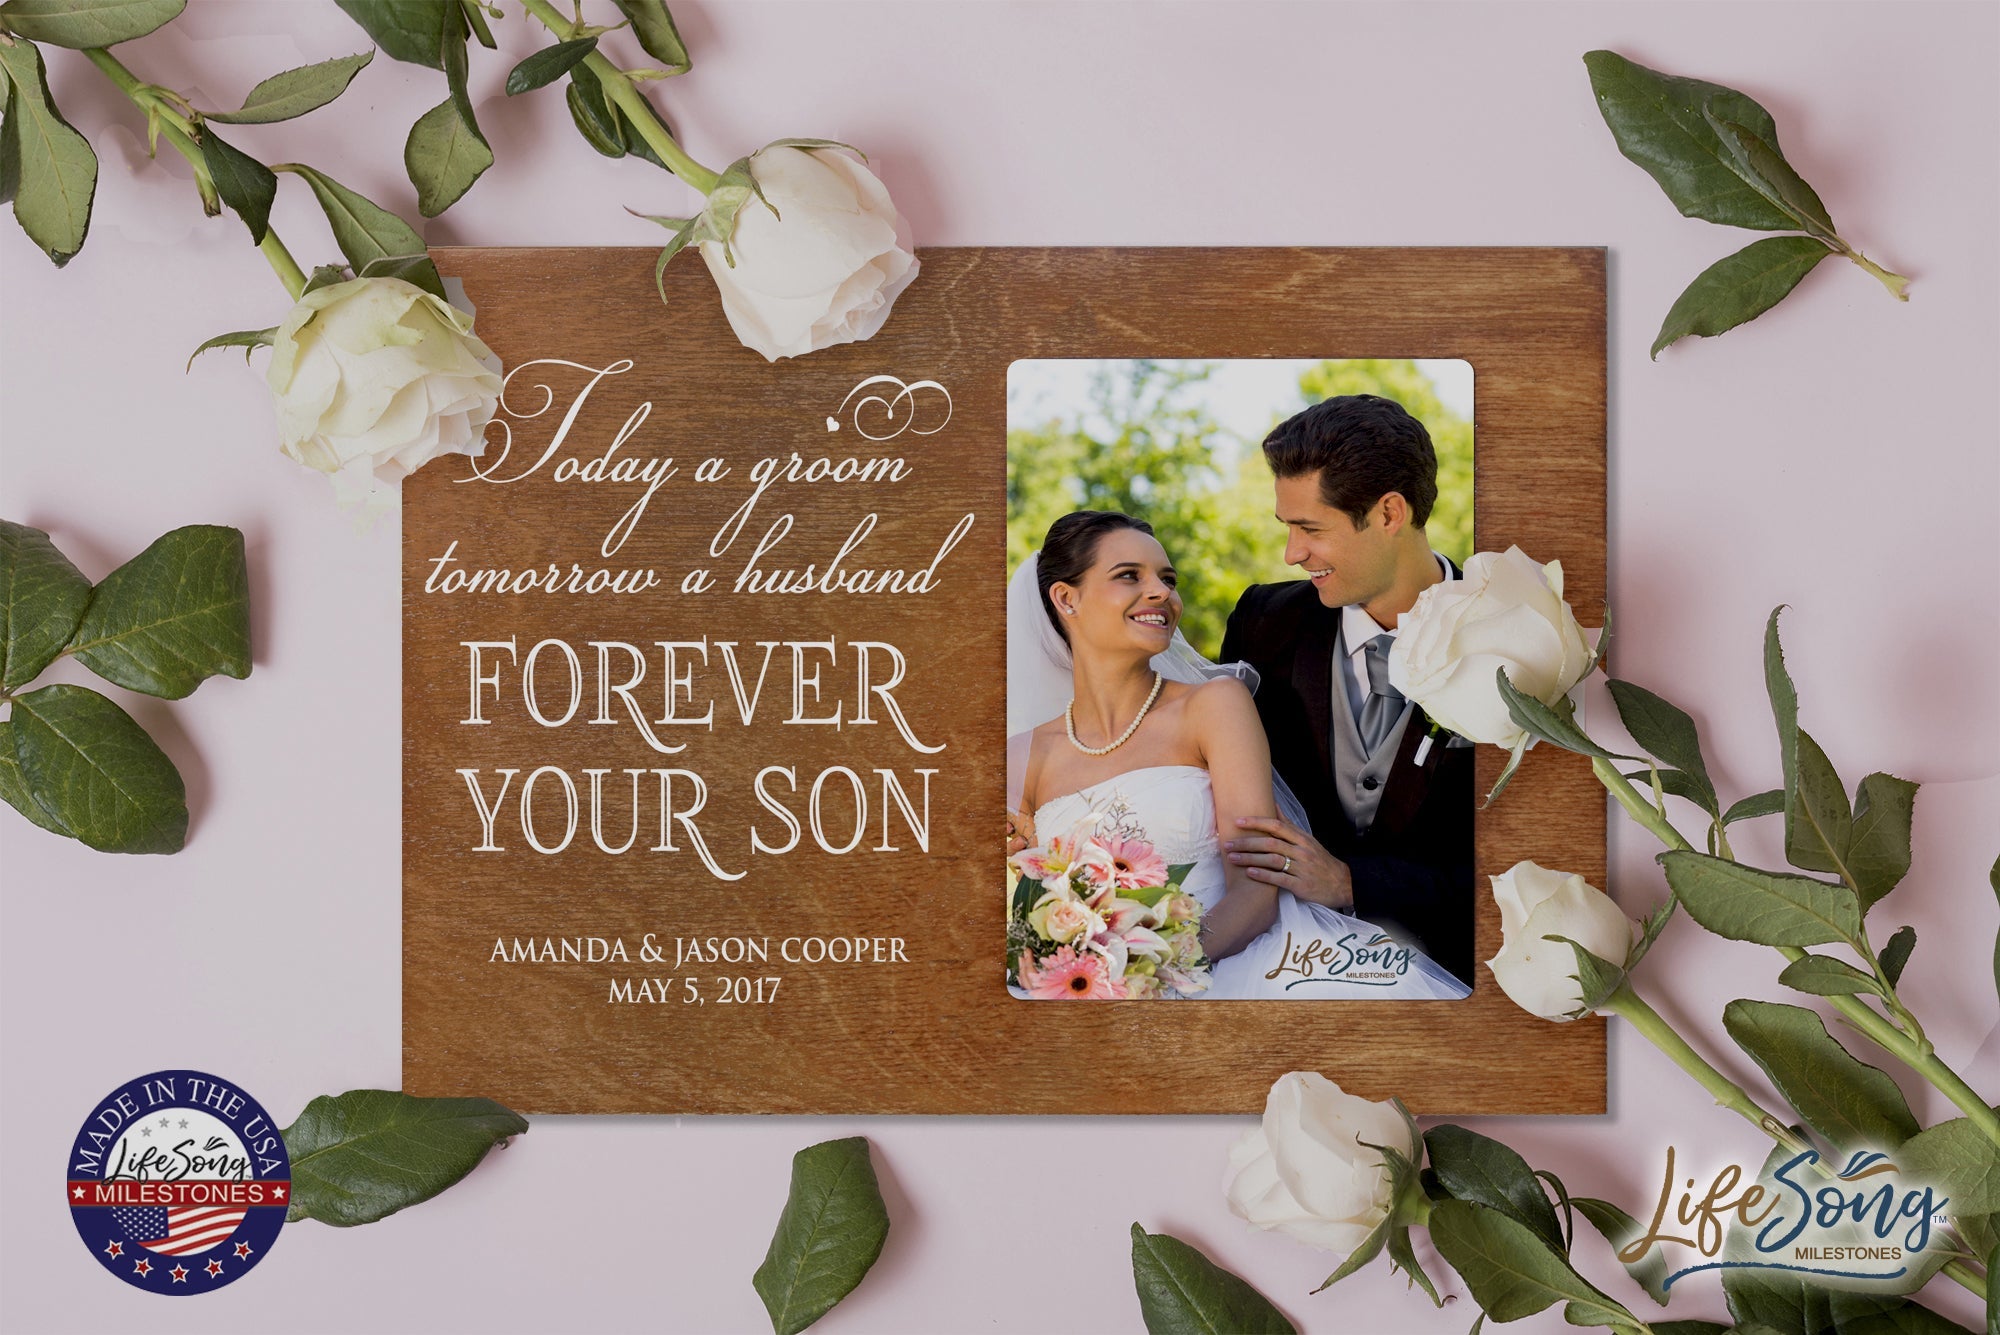 Personalized Wedding Keepsake Picture Frames - Today A Groom - LifeSong Milestones